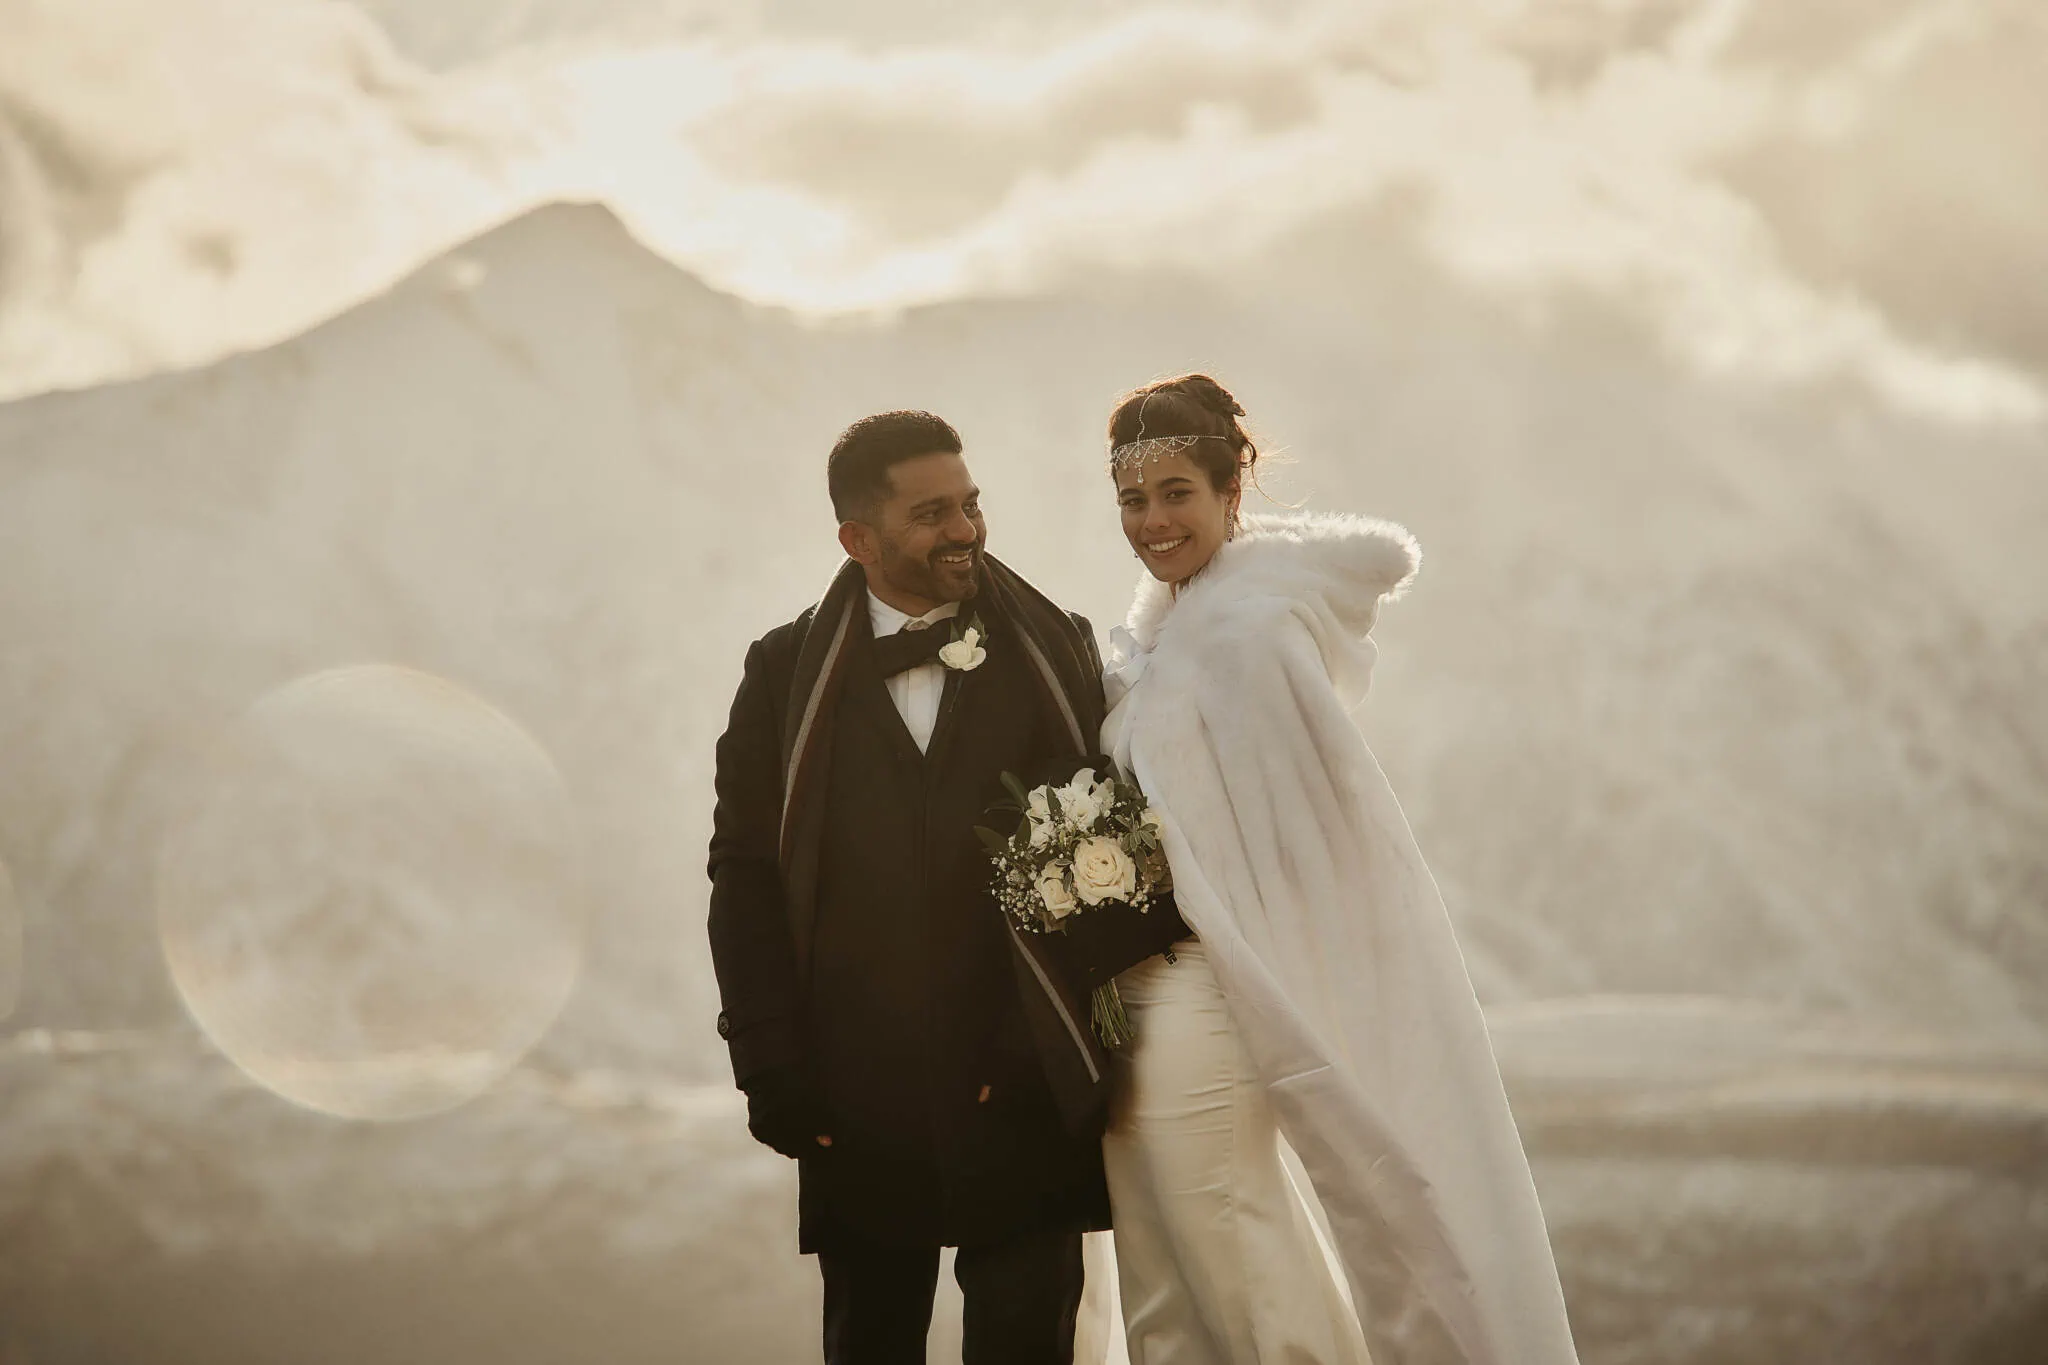 Queenstown New Zealand Elopement Wedding Photographer - Wasim and Yumn's Queenstown Islamic Wedding with a snow covered mountain backdrop.